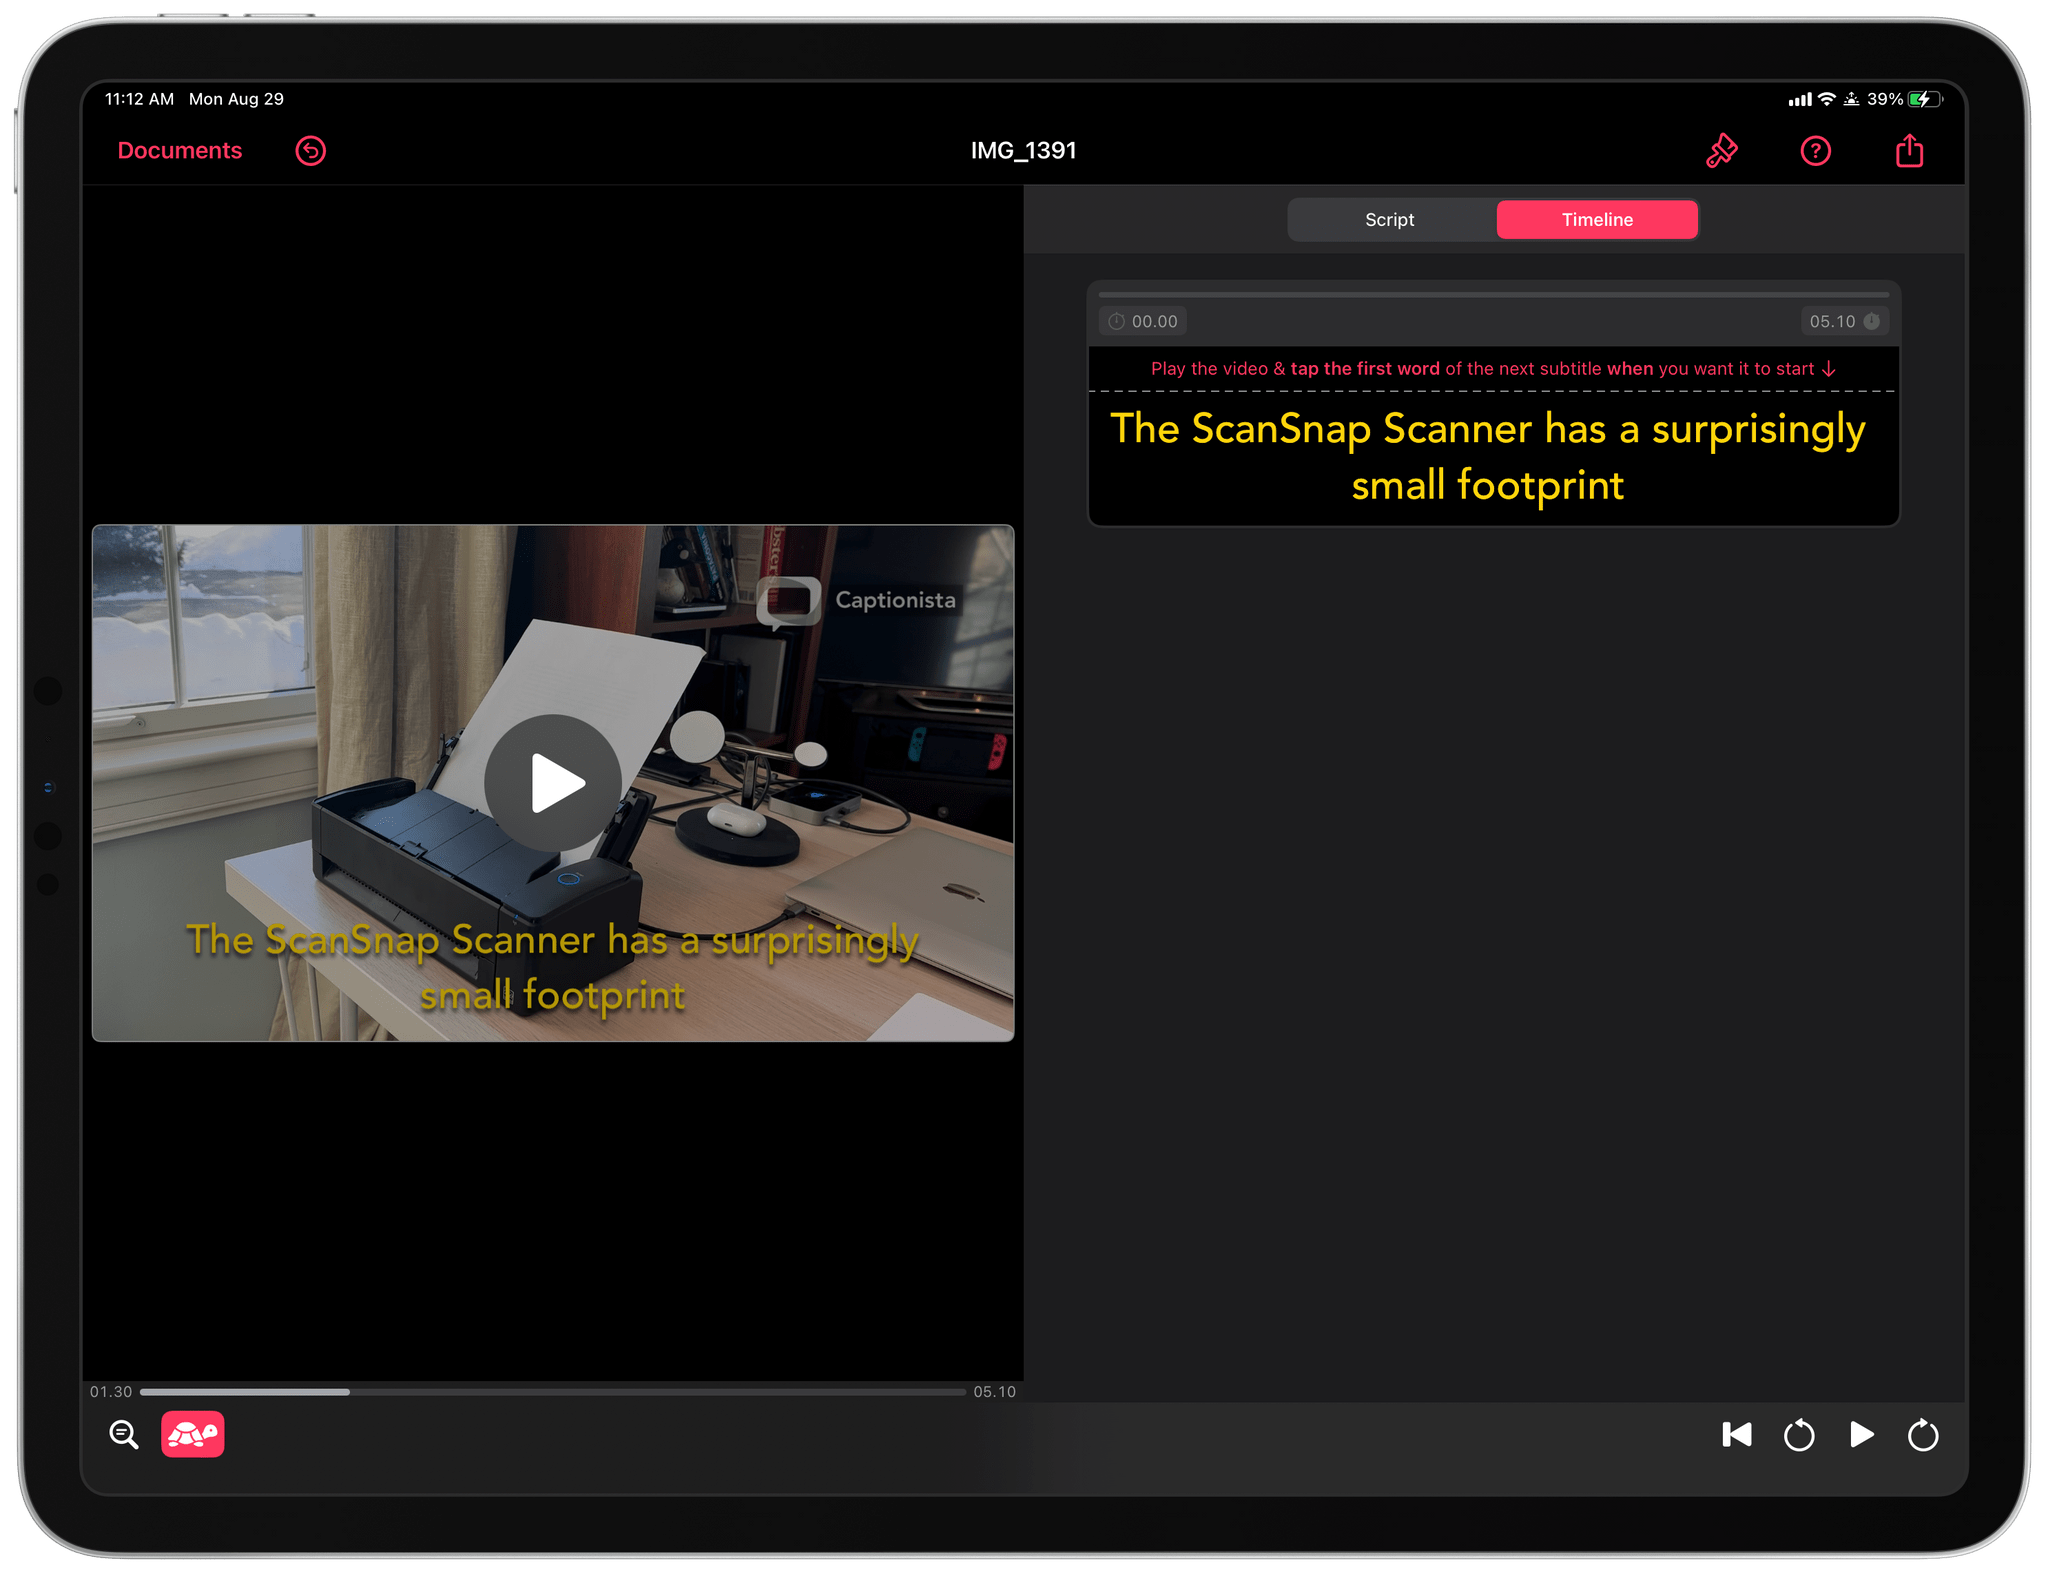 Videos live on the left of your iPad's screen and your script on the right.